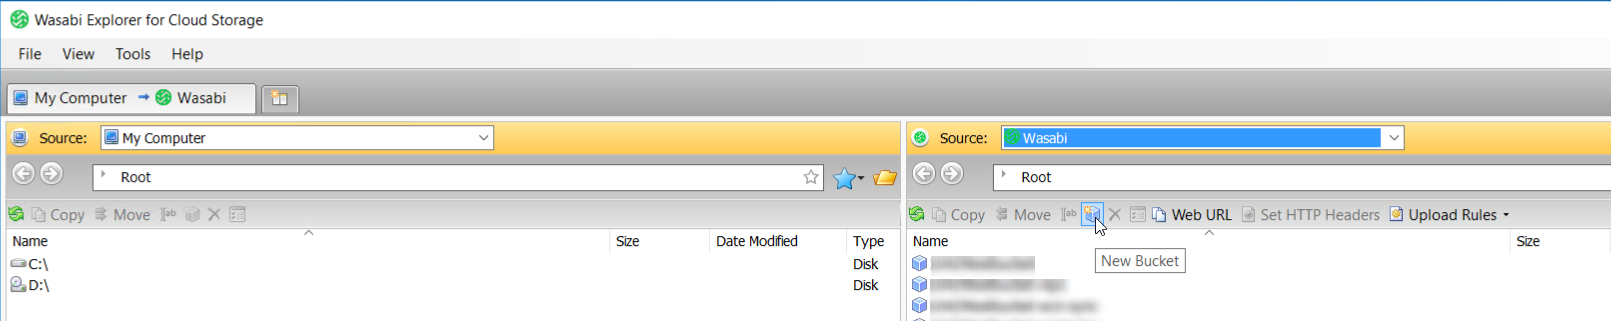 Screenshot showing how to create a new storage bucket within the Wasabi Explorer interface